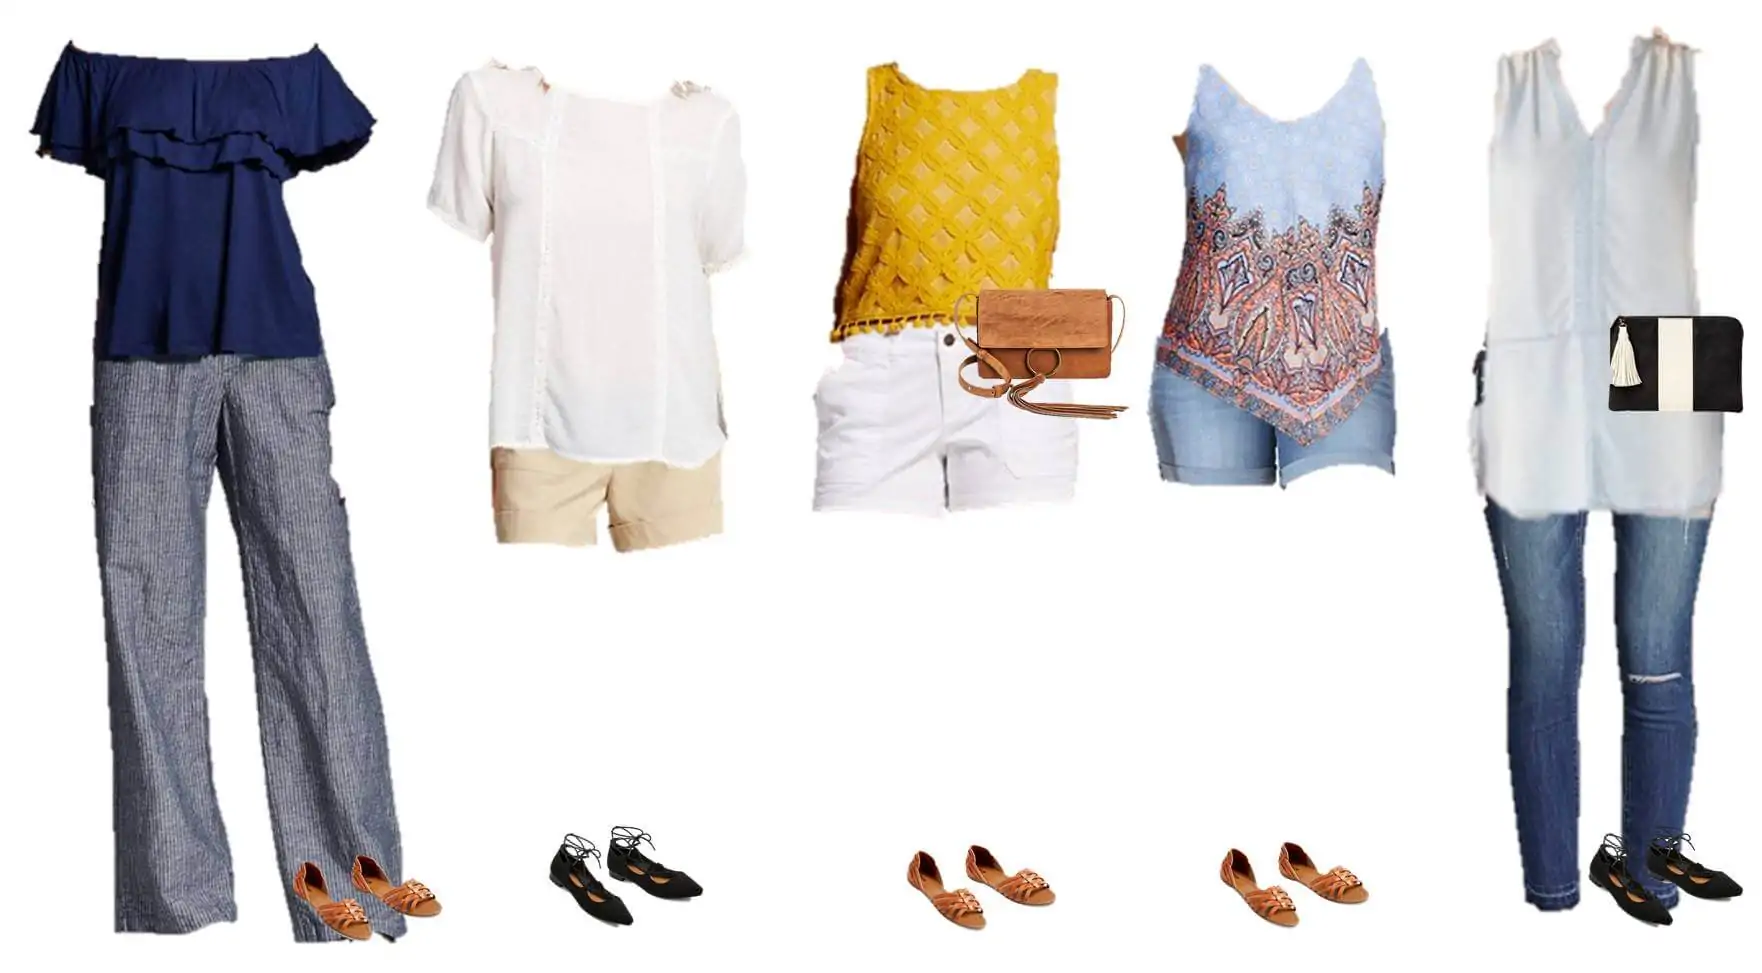 How to Make a Summer Capsule Wardrobe ⋆